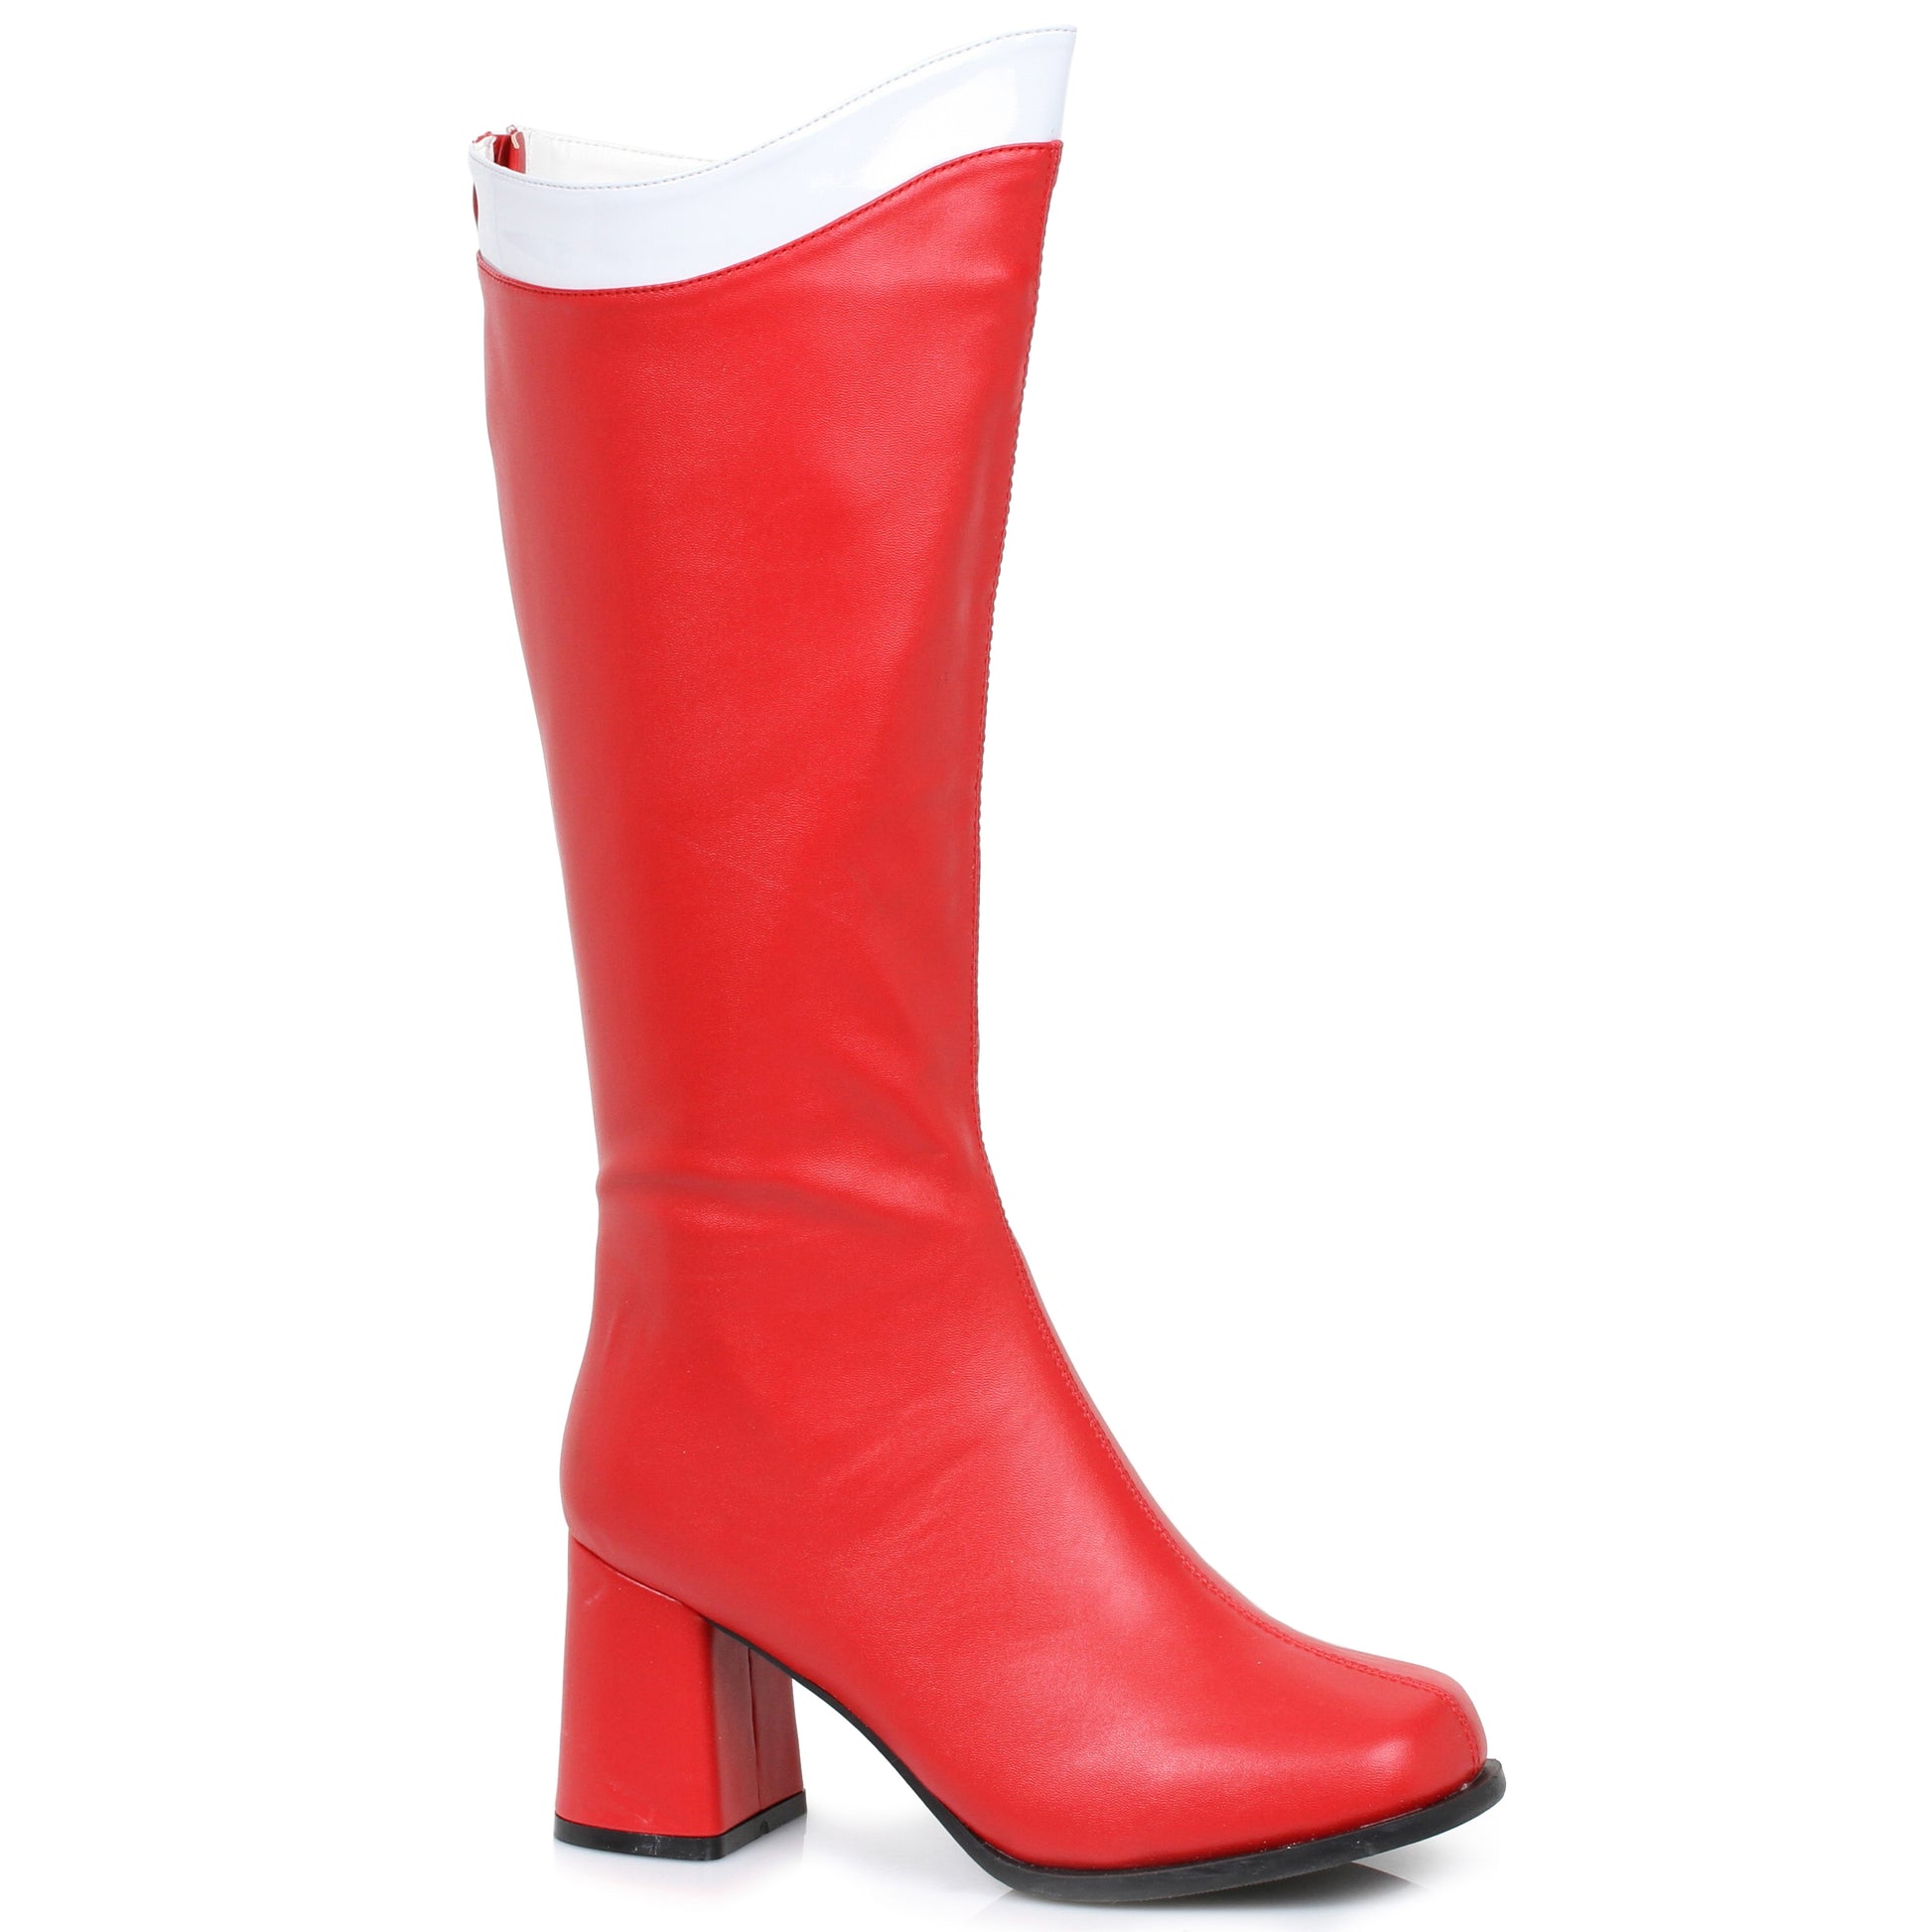 300-SUPER Ellie Shoes 3" Knee High Boot With Zipper. Womens EXTENDED S 3 INCH HEEL KNEE HIGH